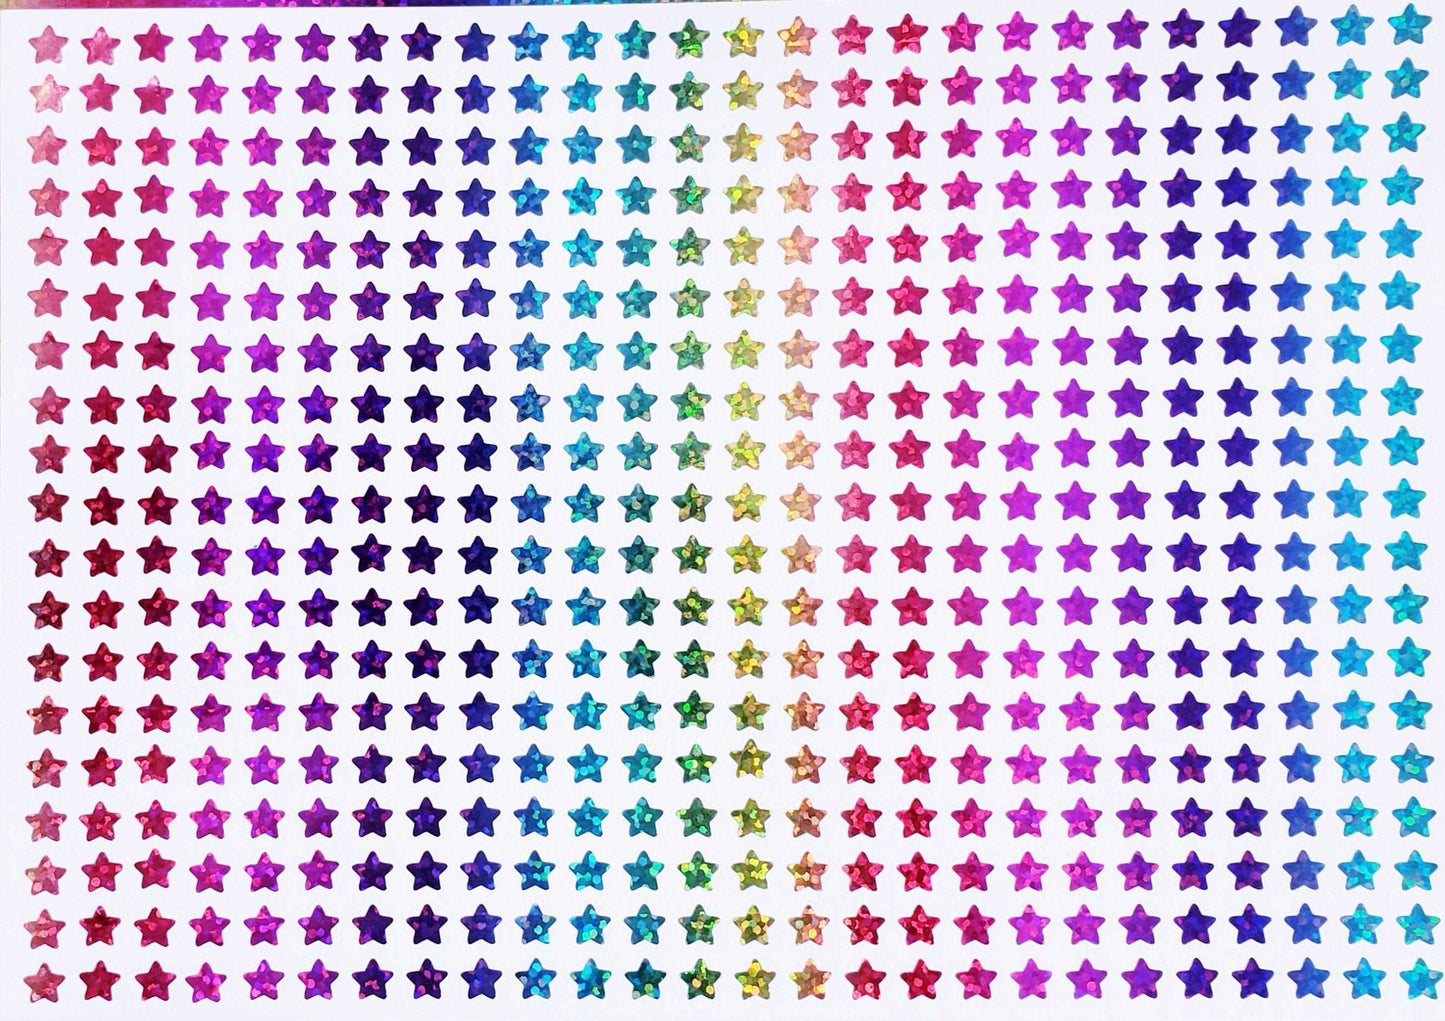 Extra Small Star Stickers, set of 490 rainbow glitter star stickers for bullet journals, notebooks, toploader card sleeves and planners.